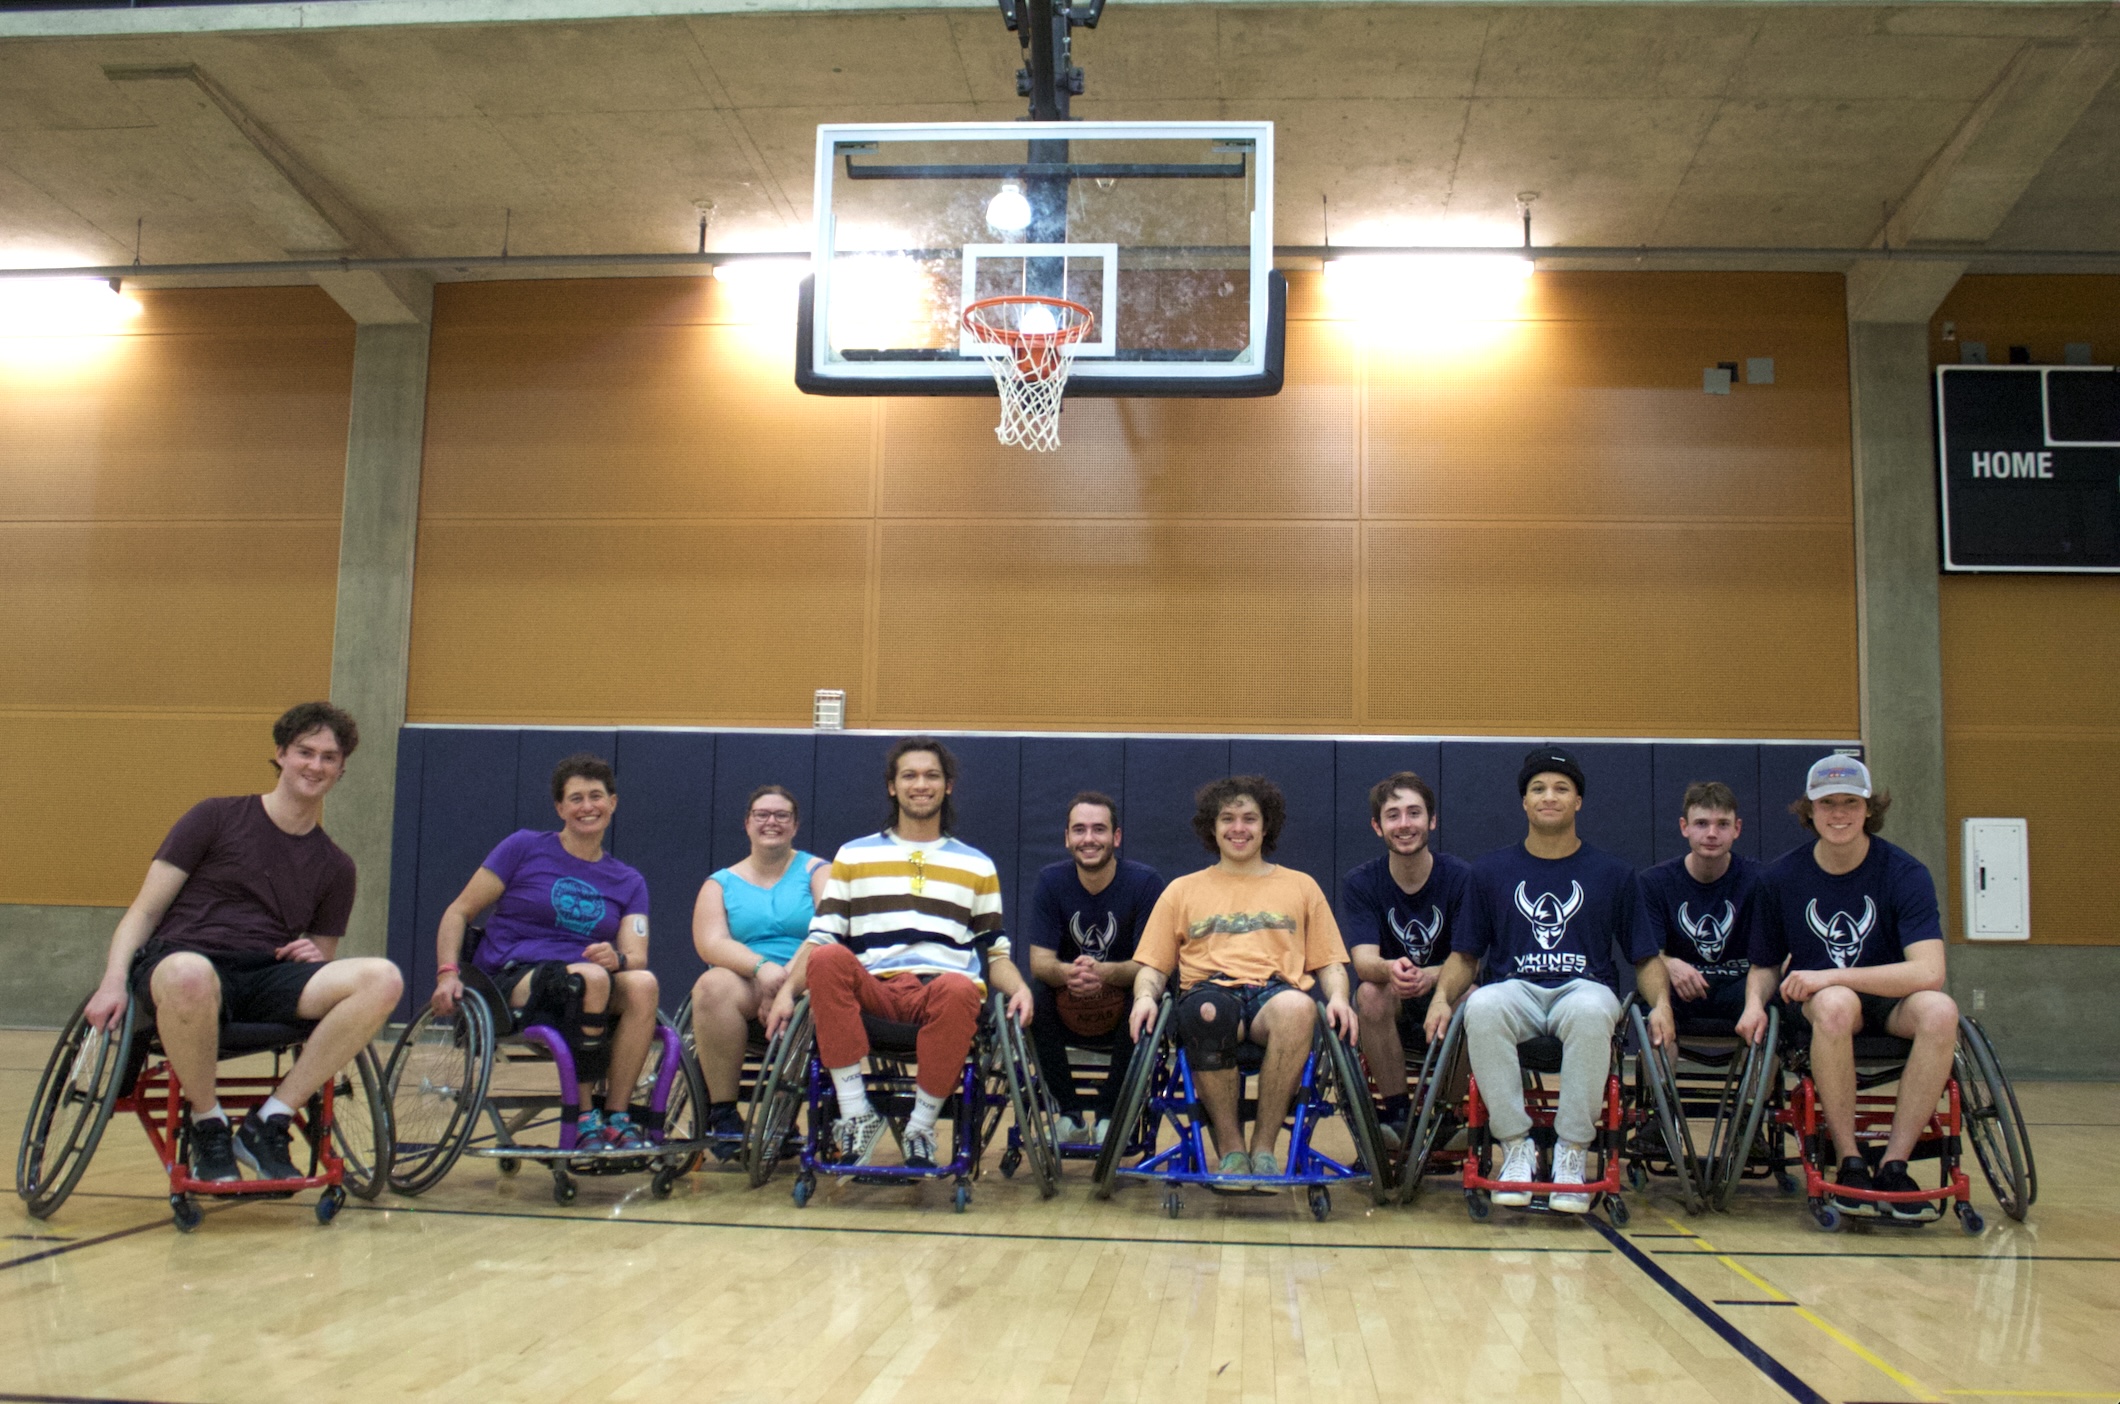 The people who participated in the wheelchair basketball event pose for a group photo.